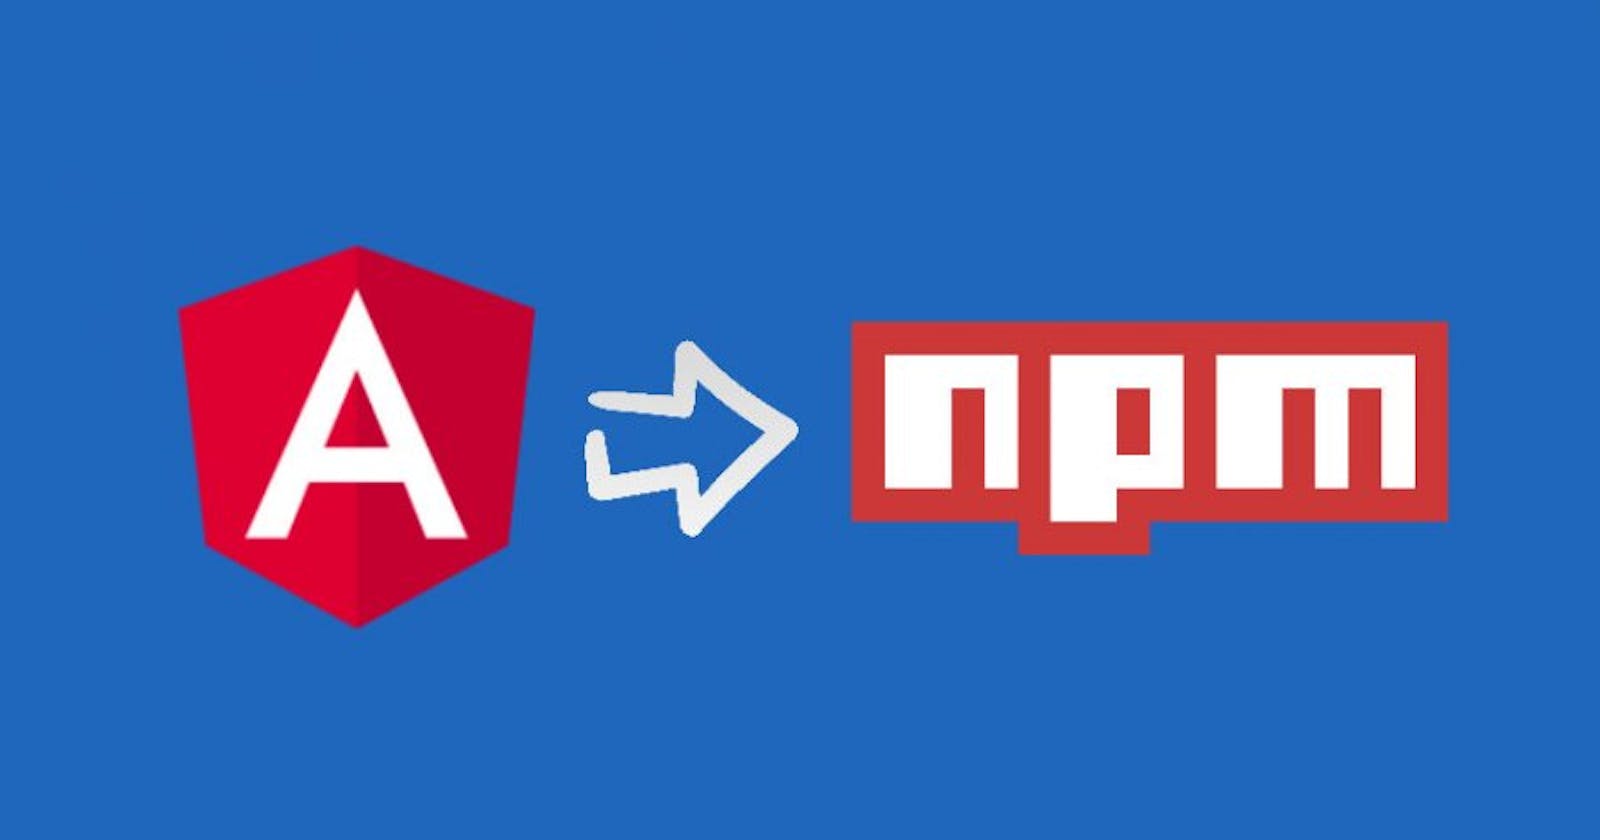 How to create an npm Angular package project using angular workspace